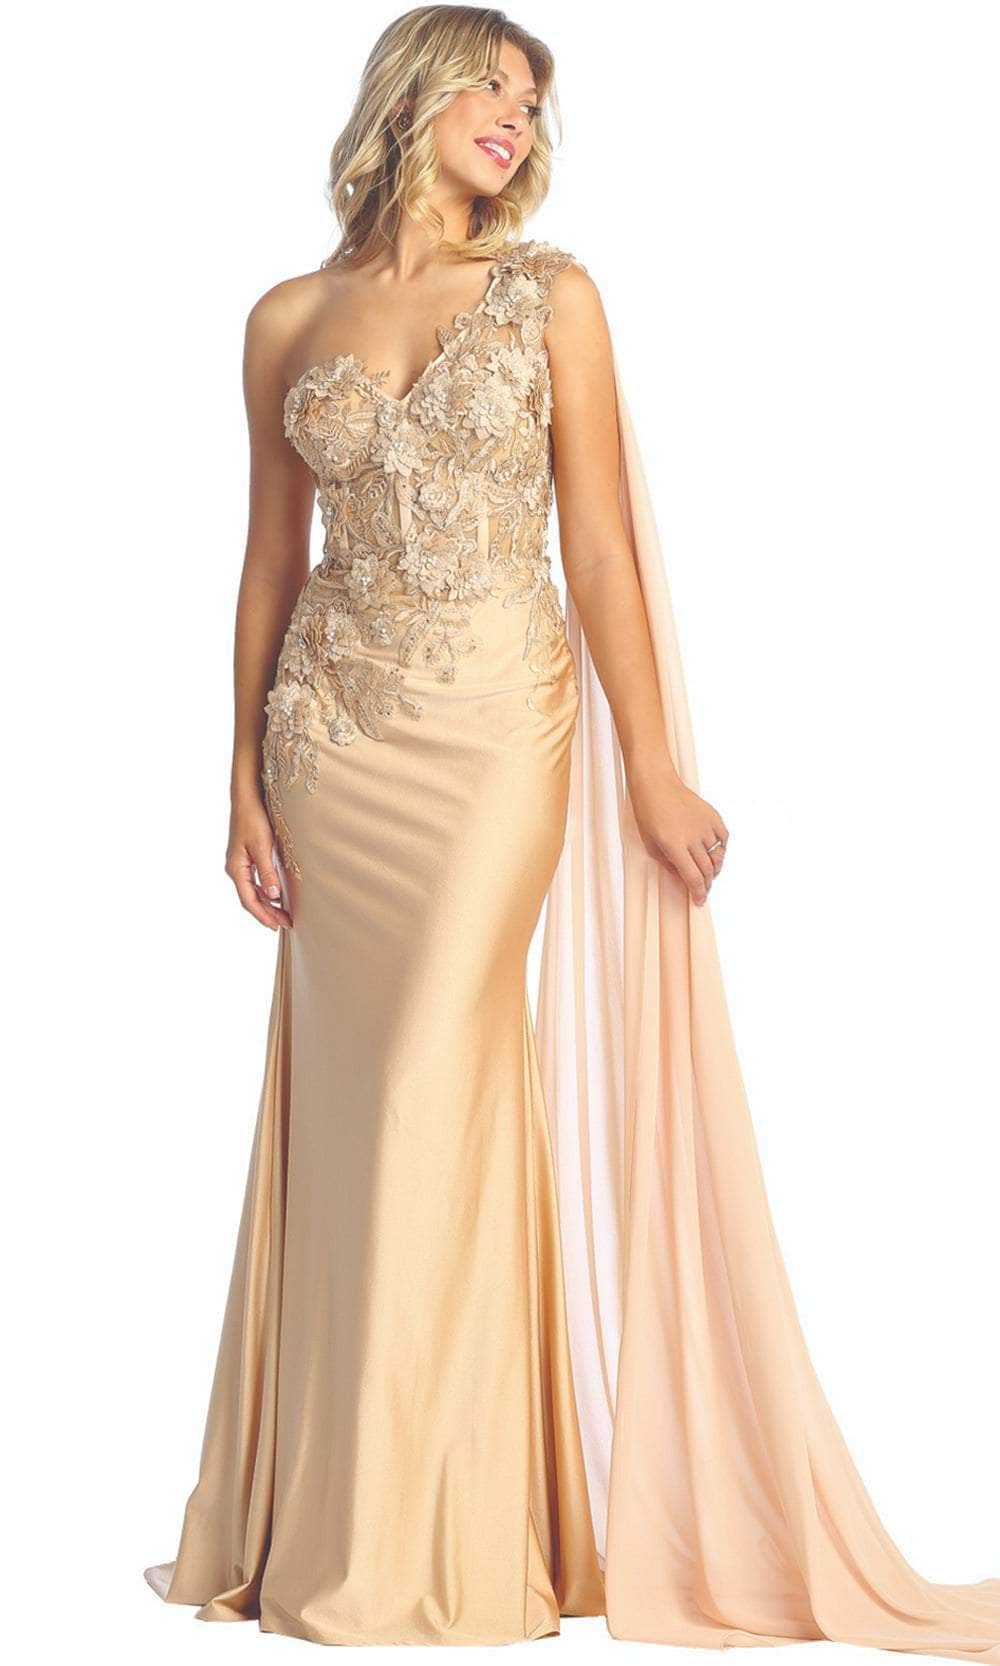 May Queen, May Queen - Embellished One Shoulder Evening Dress RQ7943